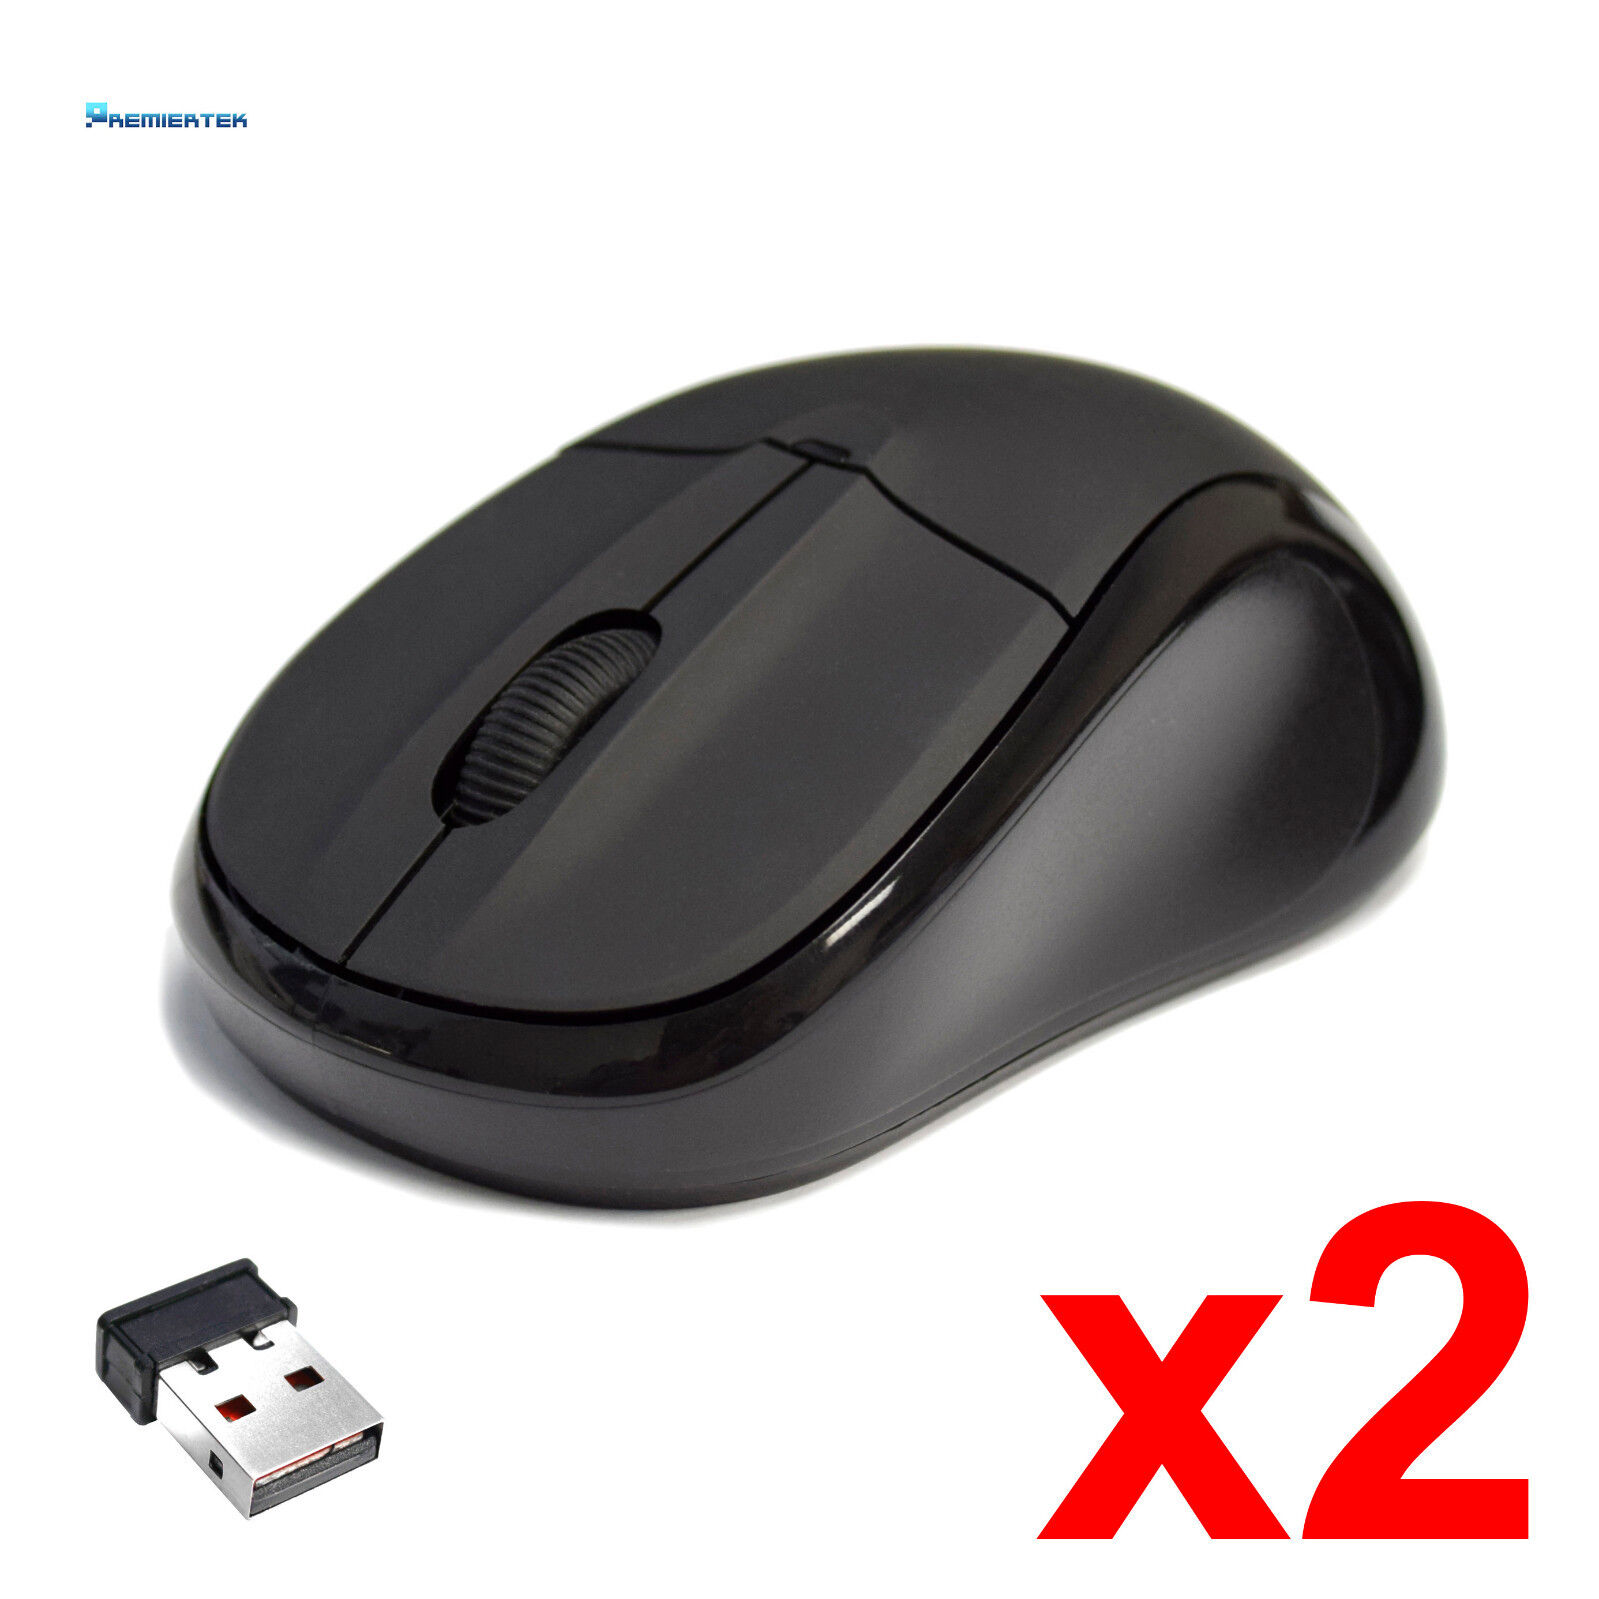 Lof of 2 2.4GHz Wireless Cordless Optical Mouse Mice +USB Receiver for PC Laptop